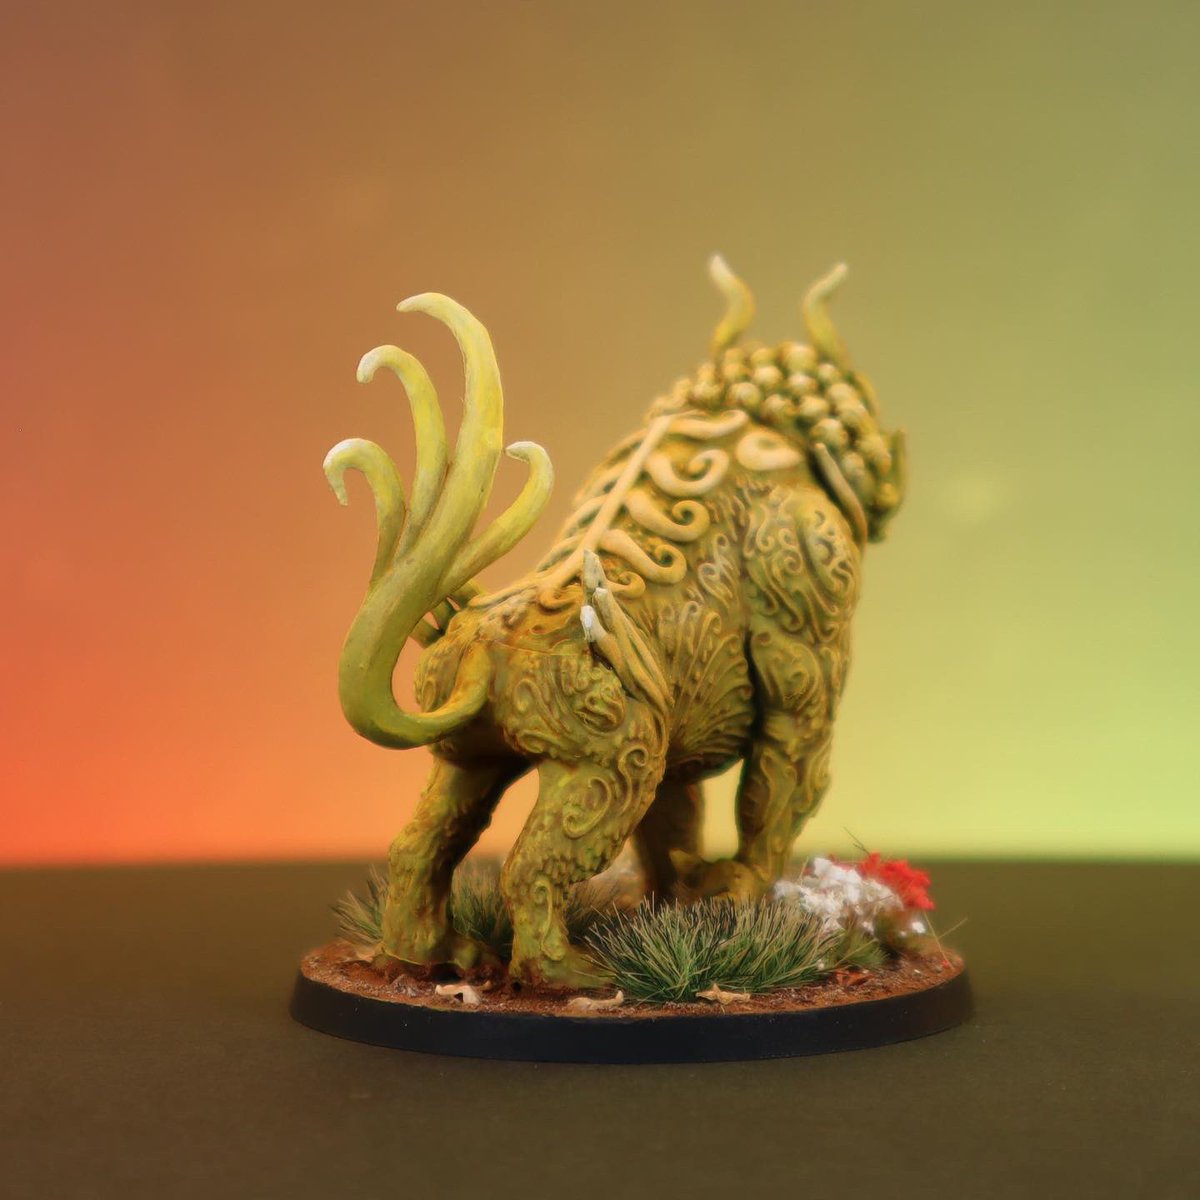 This creepy #komainu from #risingsunboardgame came to life by the hands of Sara.

What do you think?

~Tiago
#shiisaa 
#yokai
#shinto
#paintingminiatures
#paintingboardgames 
#nmm
#cmongames
#alwaysvallejo
#redgrassgames
#gamersgrass 

@CMONGames 
@vallejocolors 
@RedgrassGames